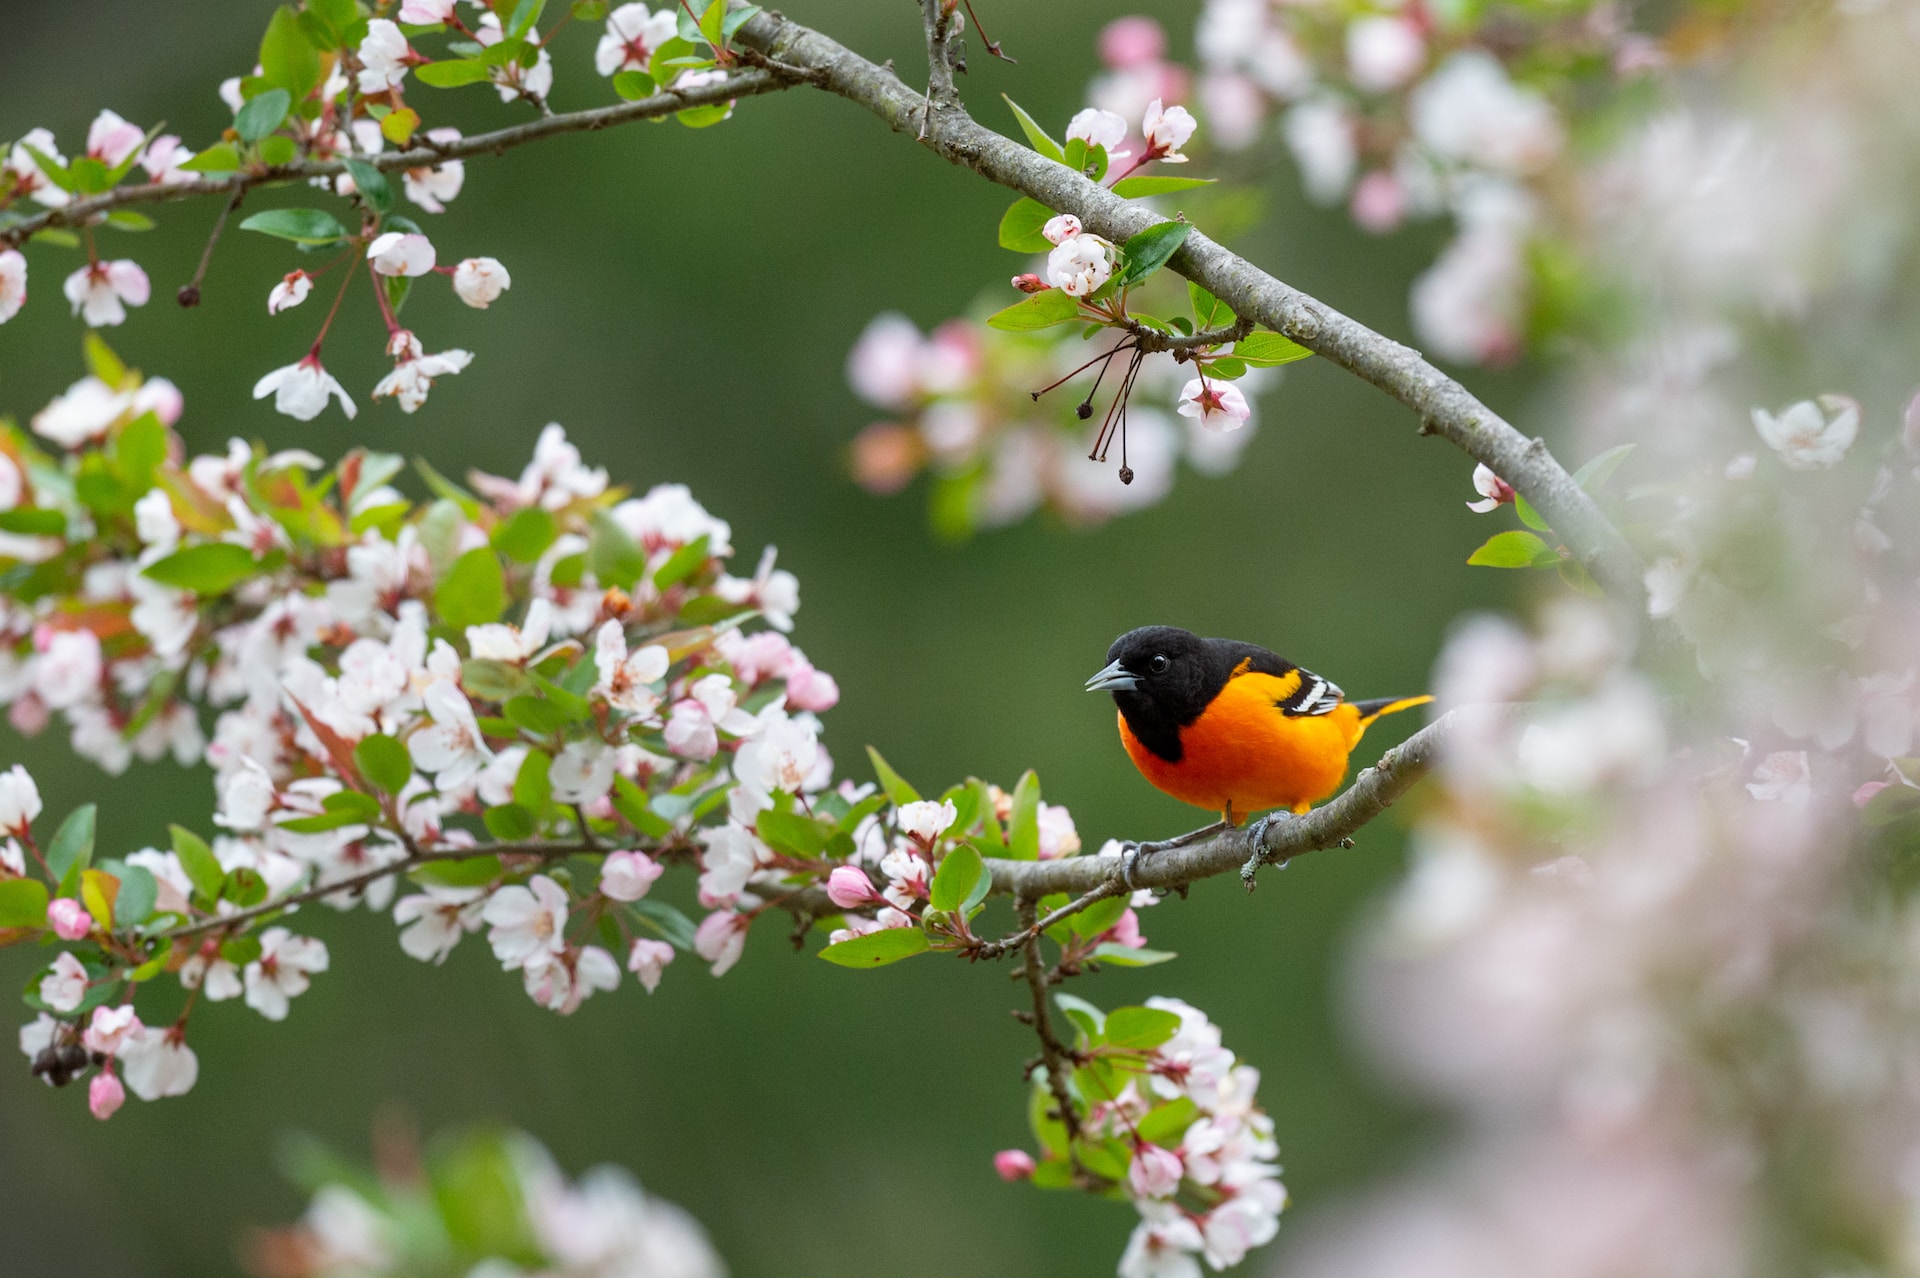 A baltimore oriole sitting on a tree branch